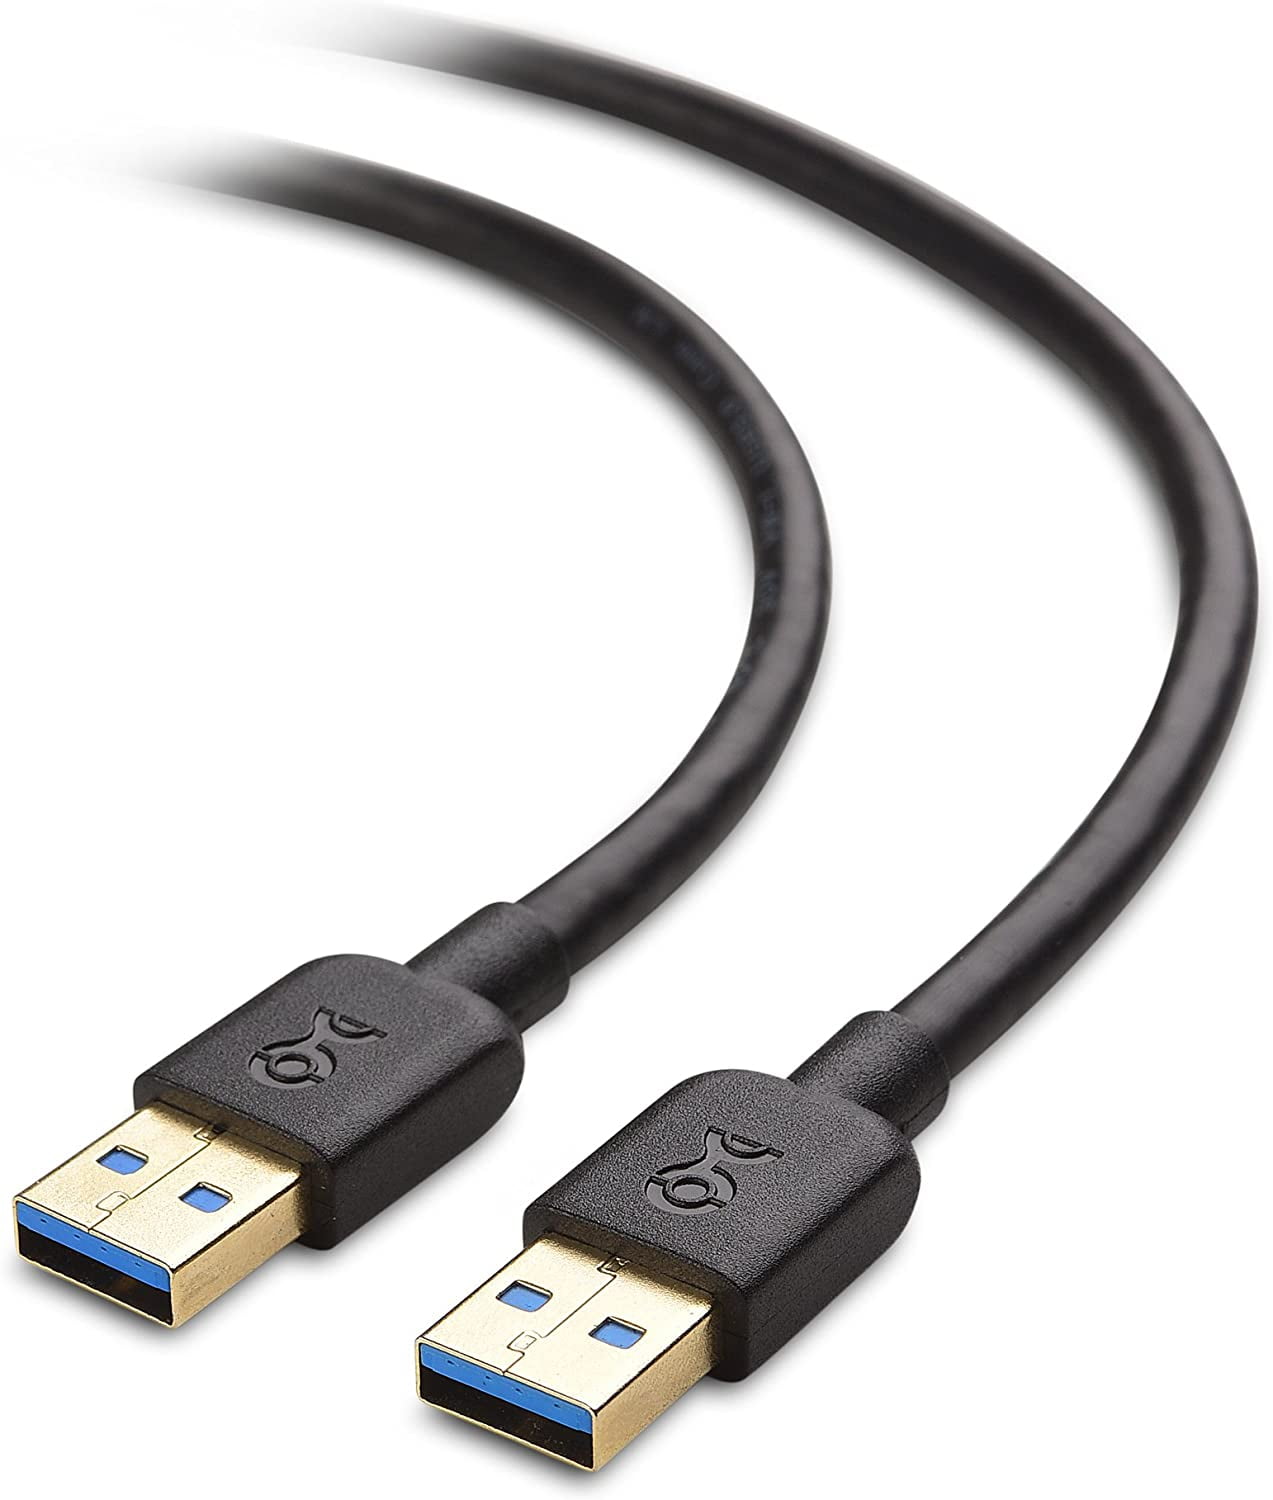 Cable Matters 2-Pack USB 3.0 Cable 6ft, USB to USB Cable/USB A to USB A  Cable/Male to Male USB Cord/Double USB Cord in Black